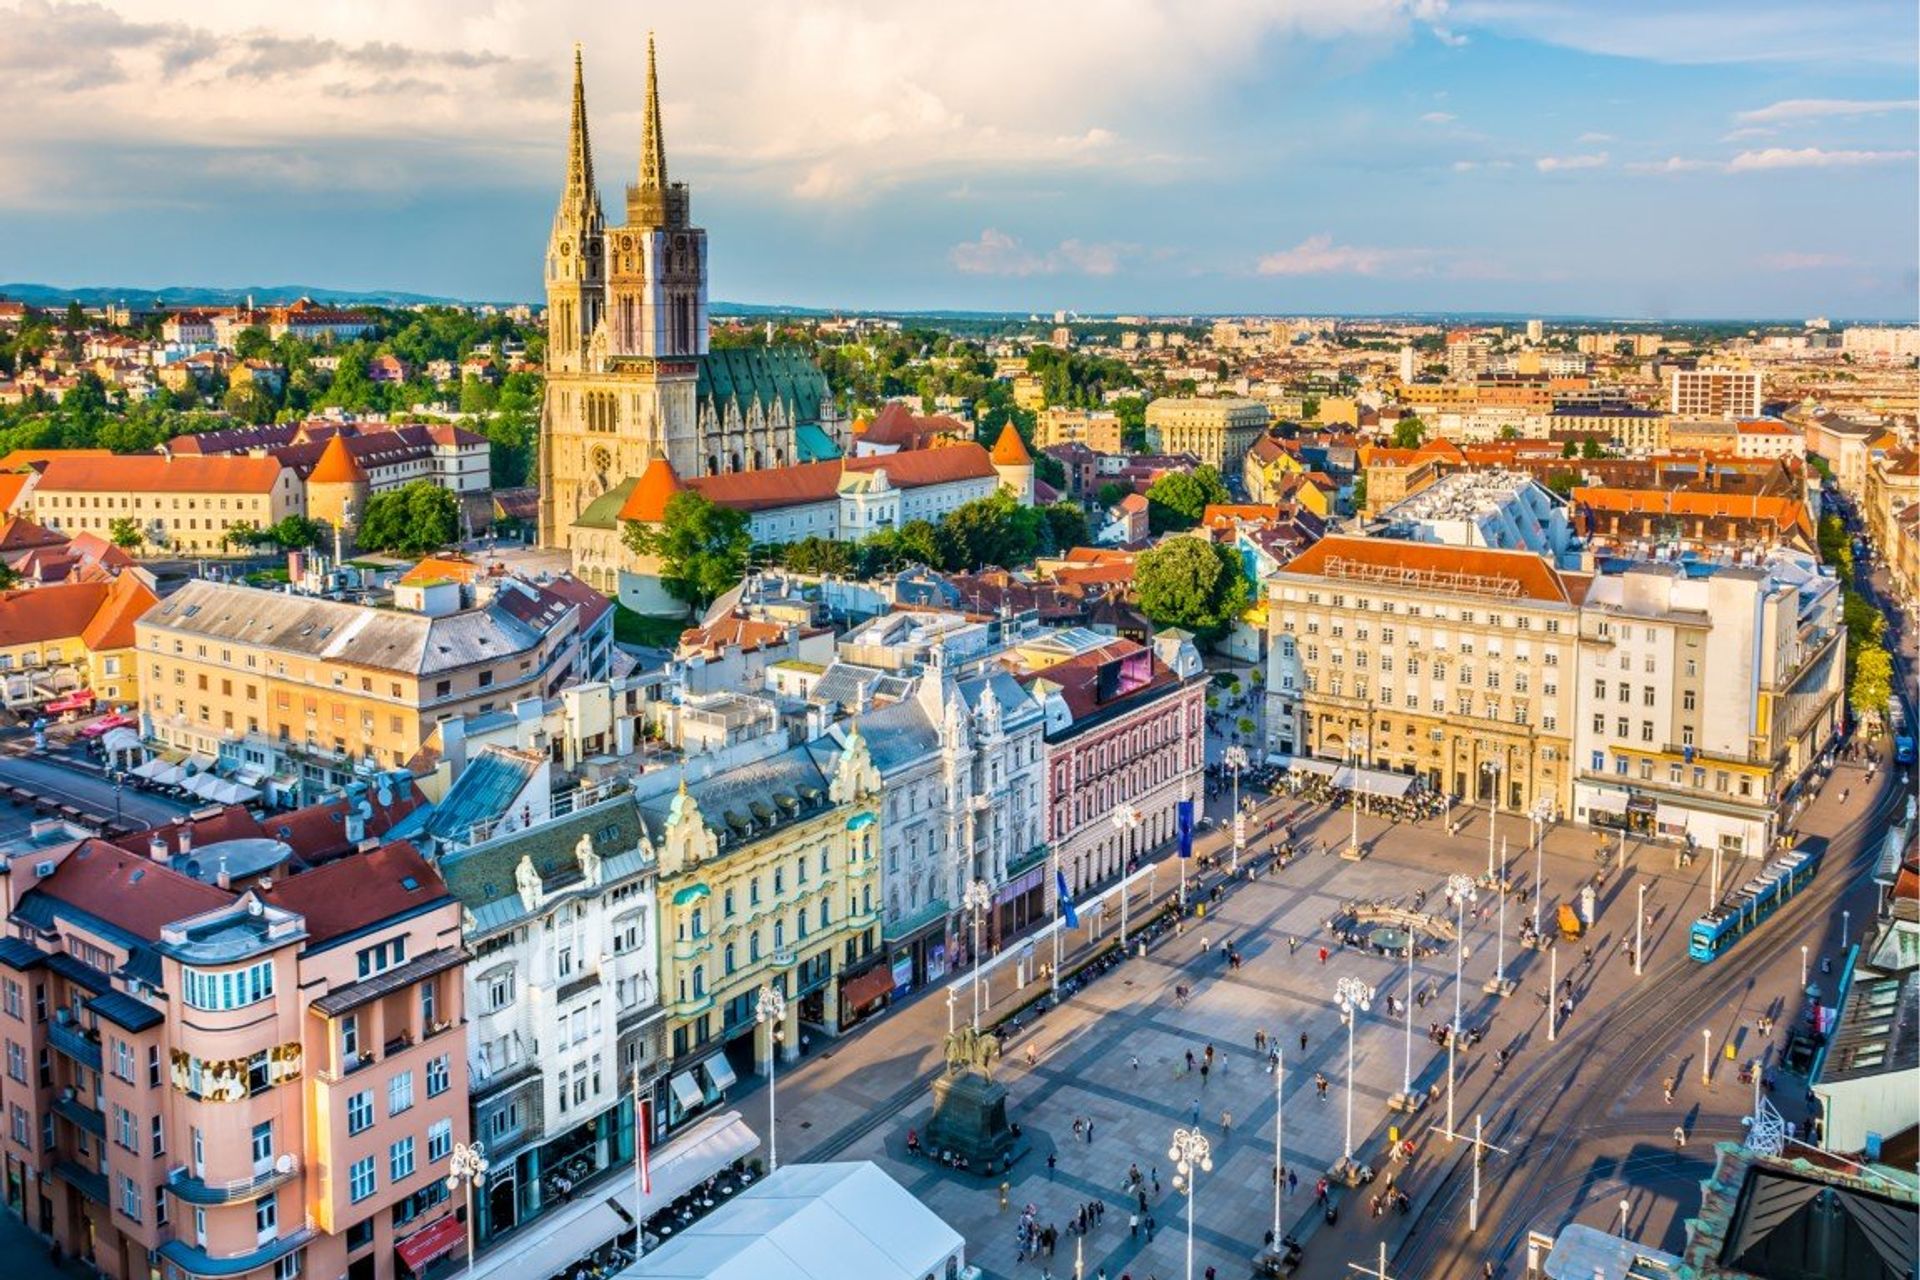 Zagreb city's main square is the beating heart of Croatian culture